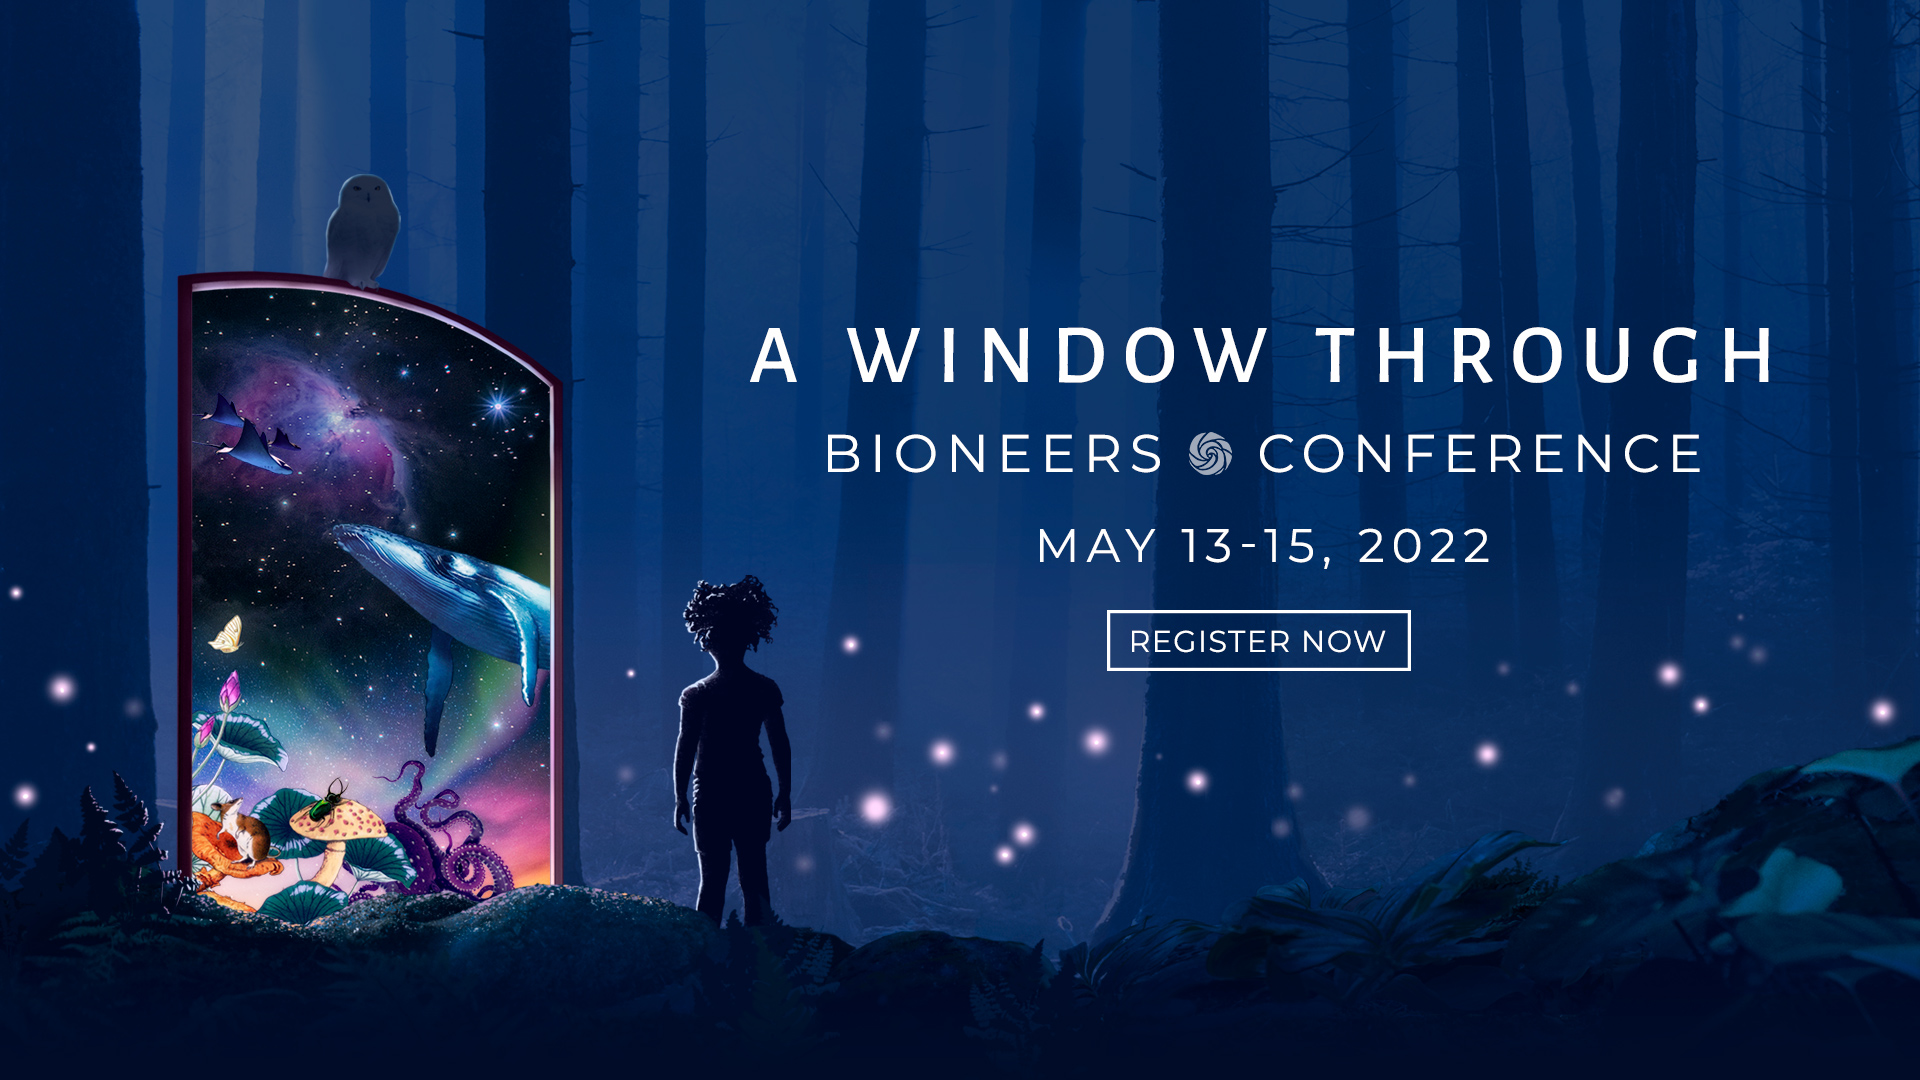 Bioneers 2022 Conference - A Window Through